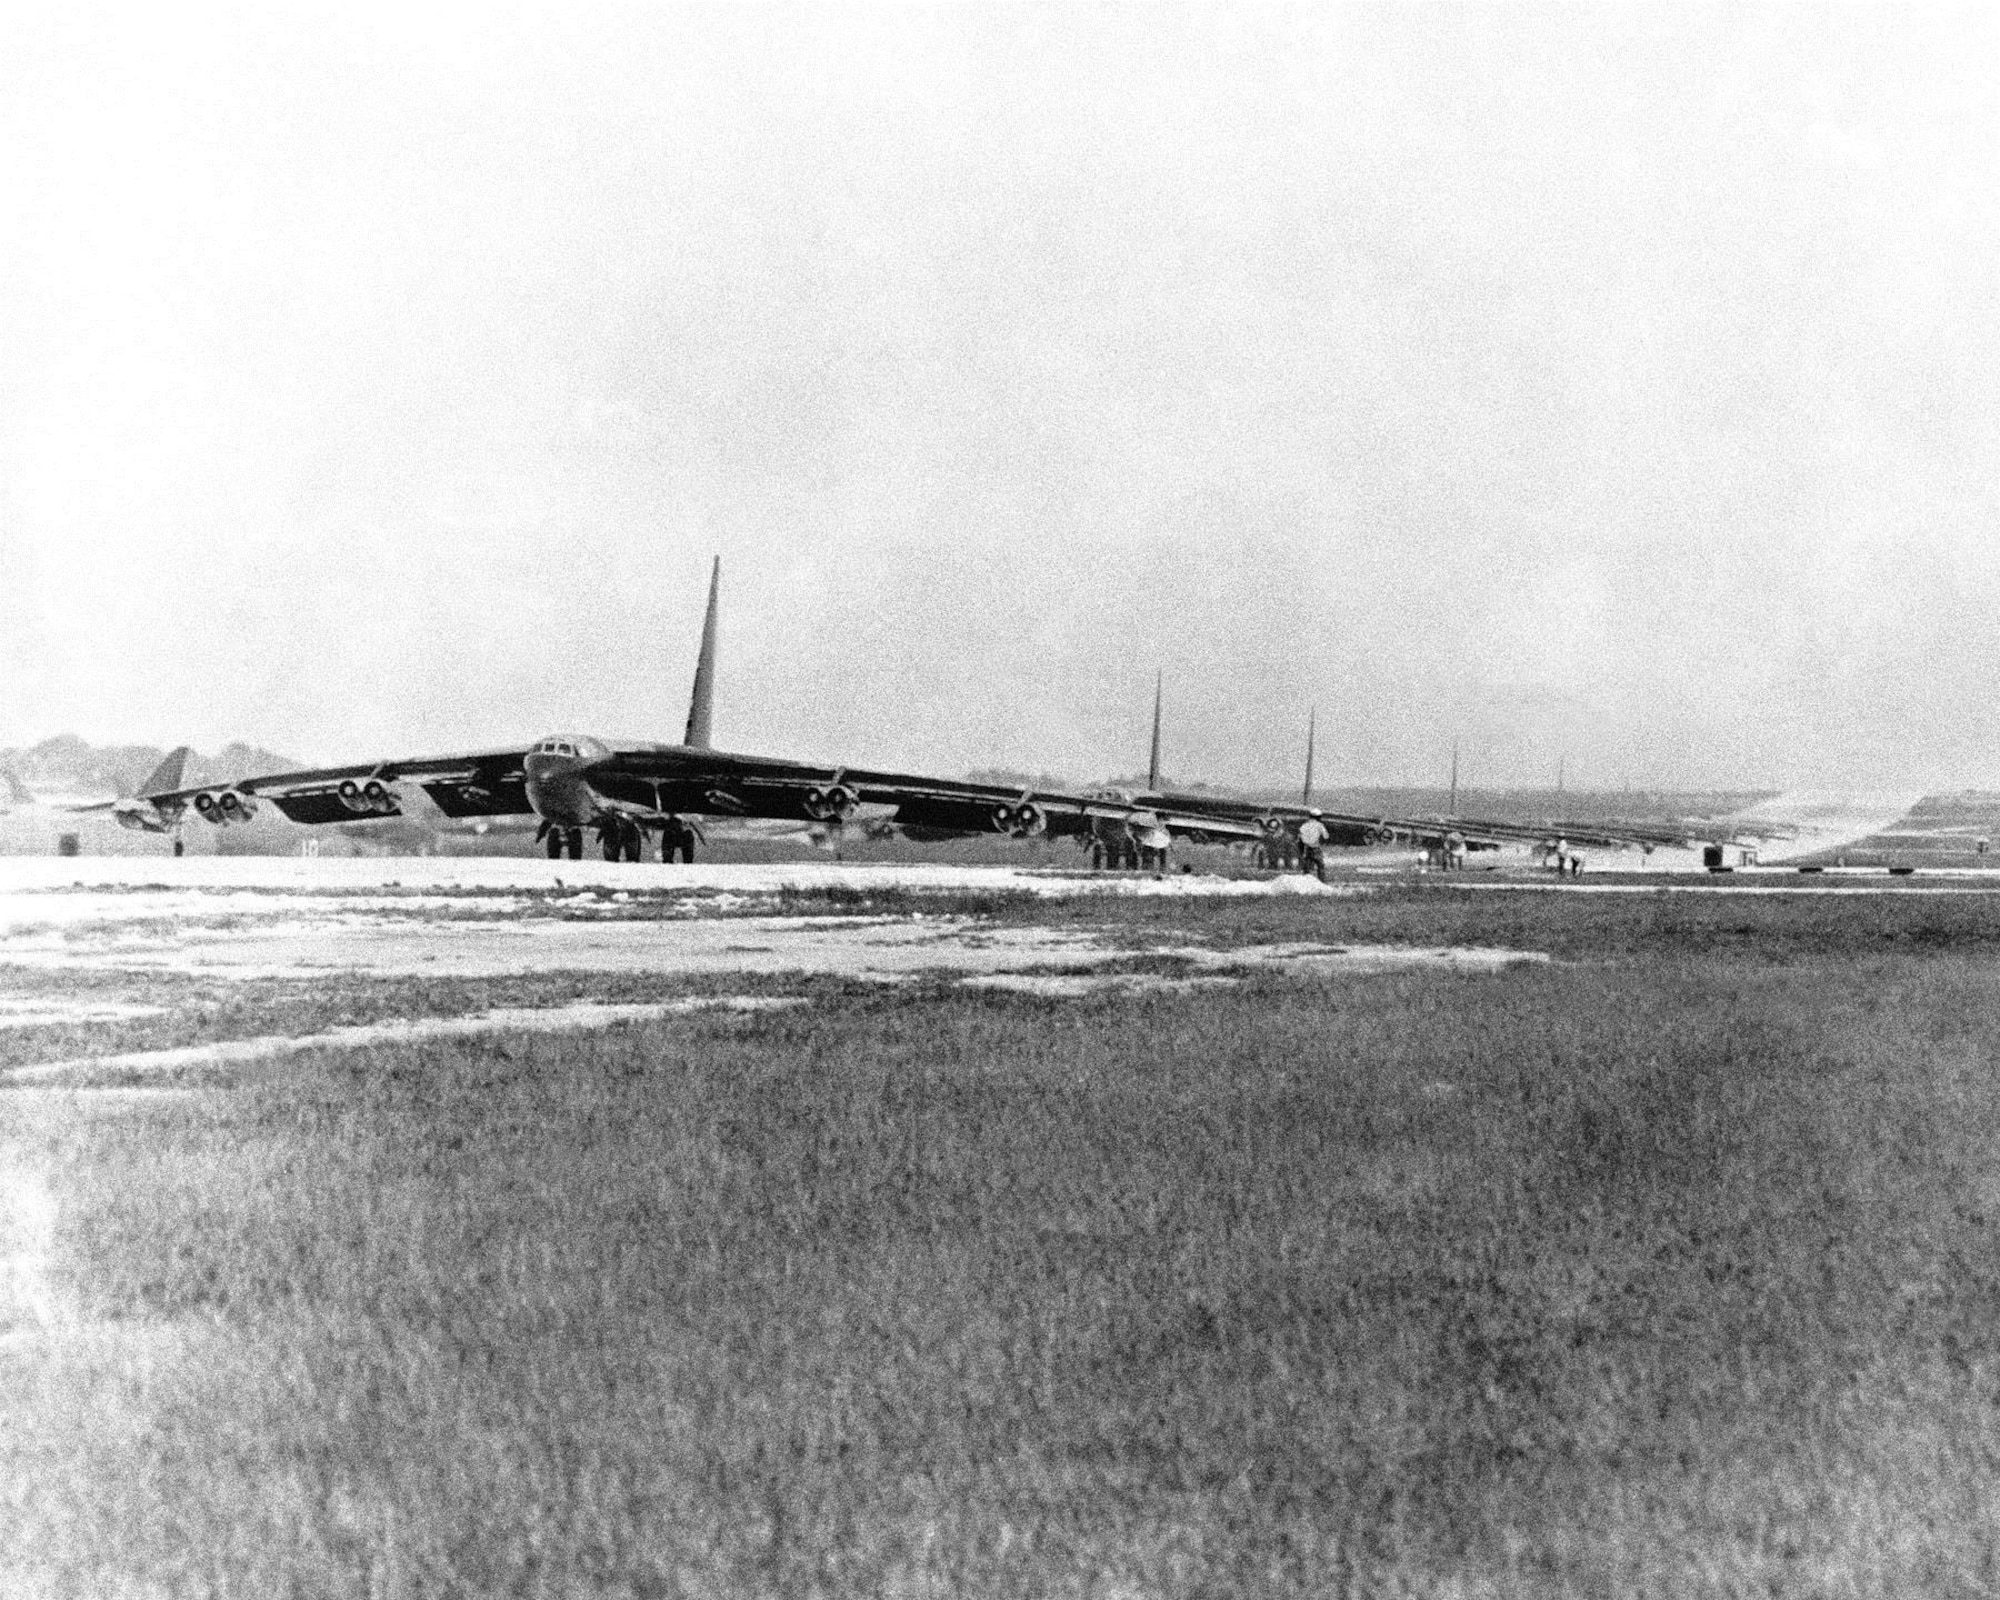 B-52D Stratofortress heavy bombers from the Strategic Air Command line up for takeoff as they prepare for strikes over Hanoi and Haiphong, North Vietnam, during Operation LINEBACKER in 1972.  Several OreANG members, including Joseph Agloro, Todd Petty and Glenn Scott served with B-52 units during the war.  (U.S. Air Force photo)